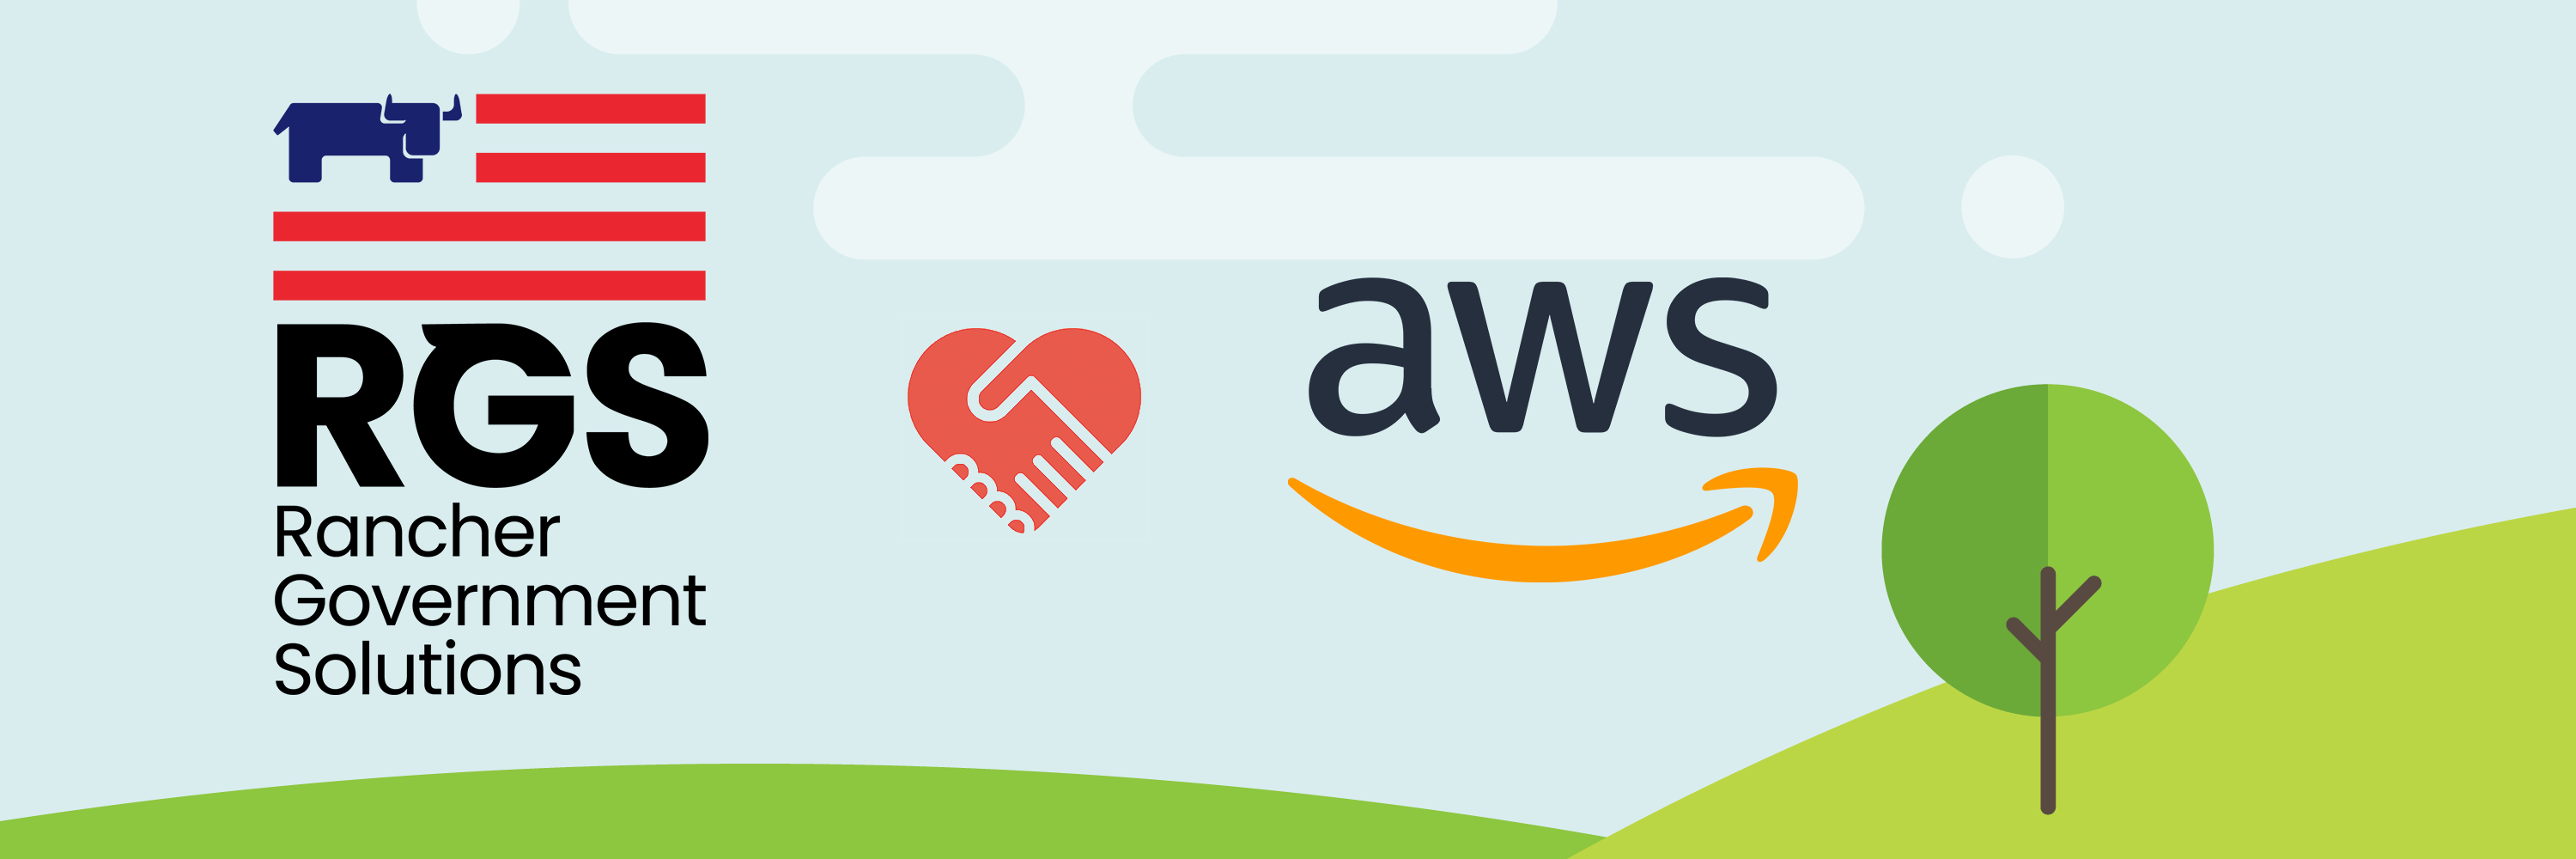 Kubernetes on the AWS GovCloud!